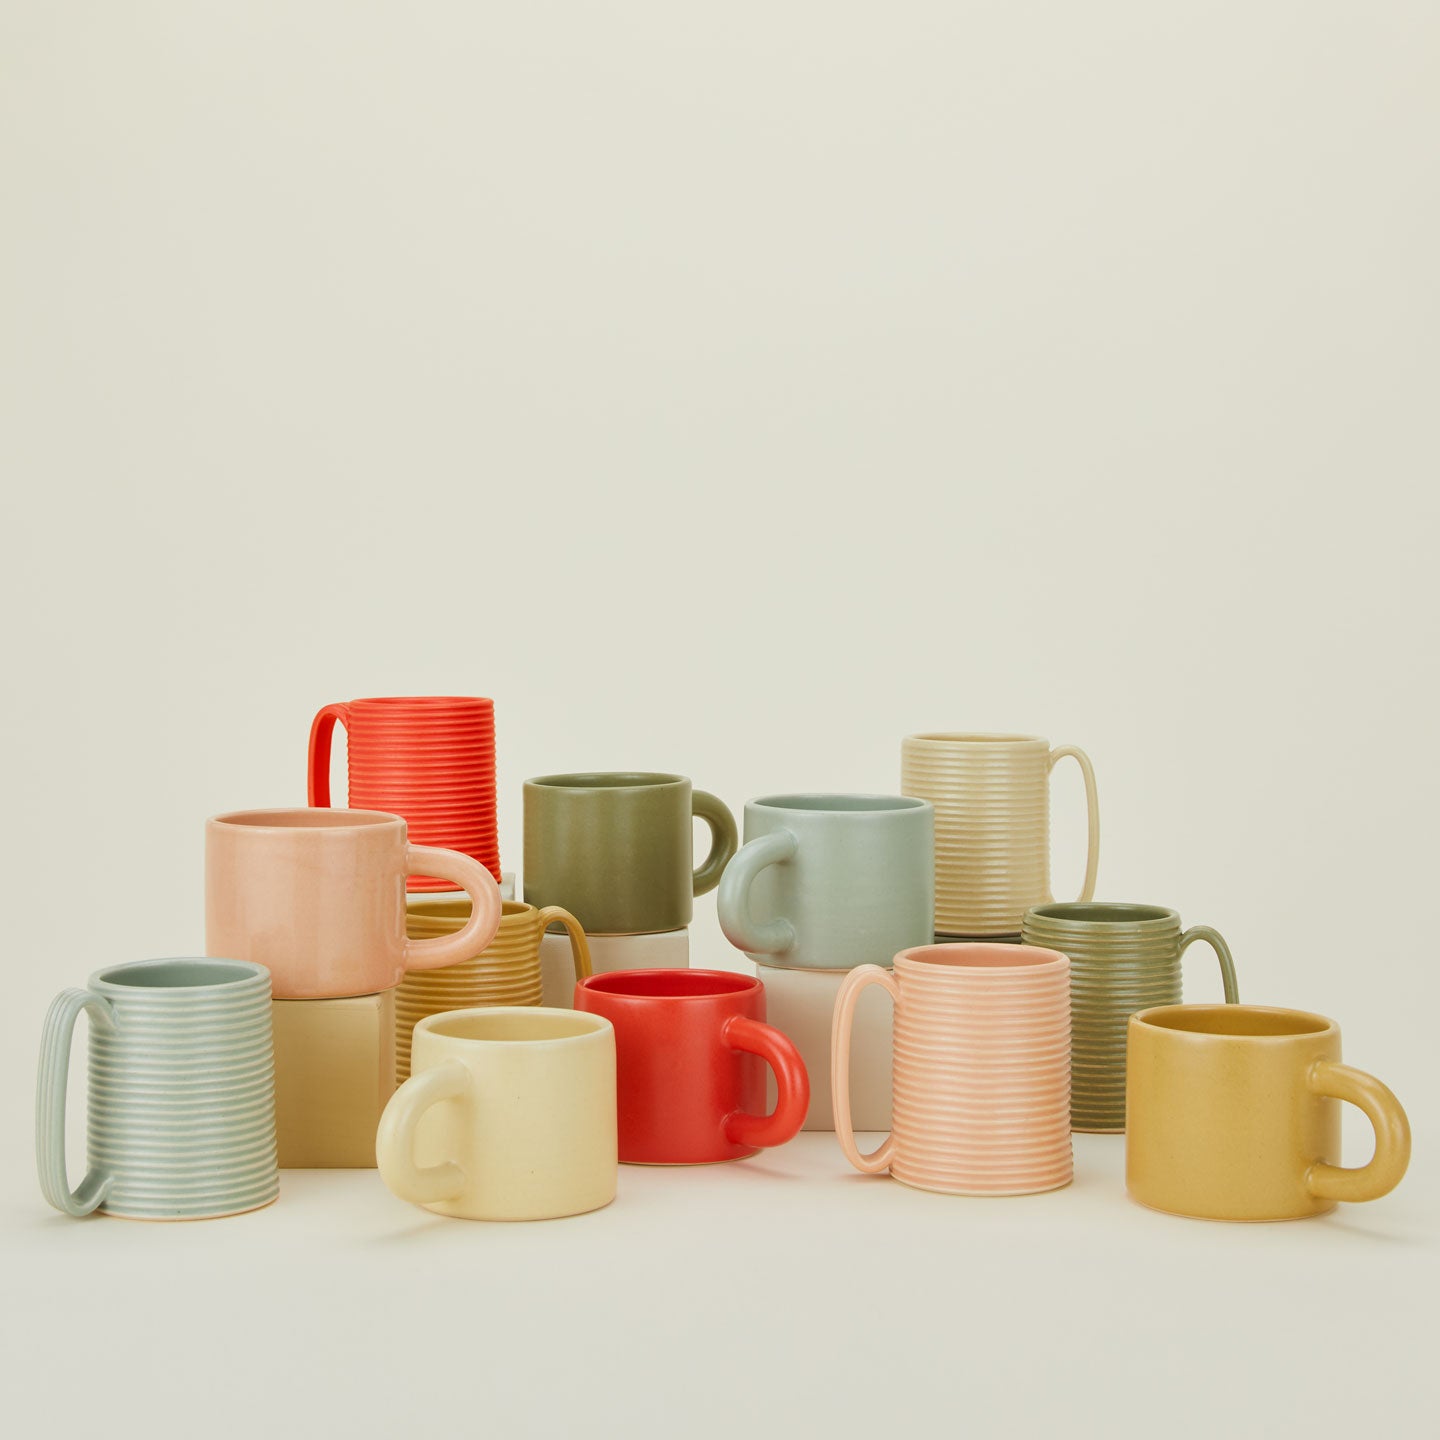 Group of mugs in various colors and sizes.